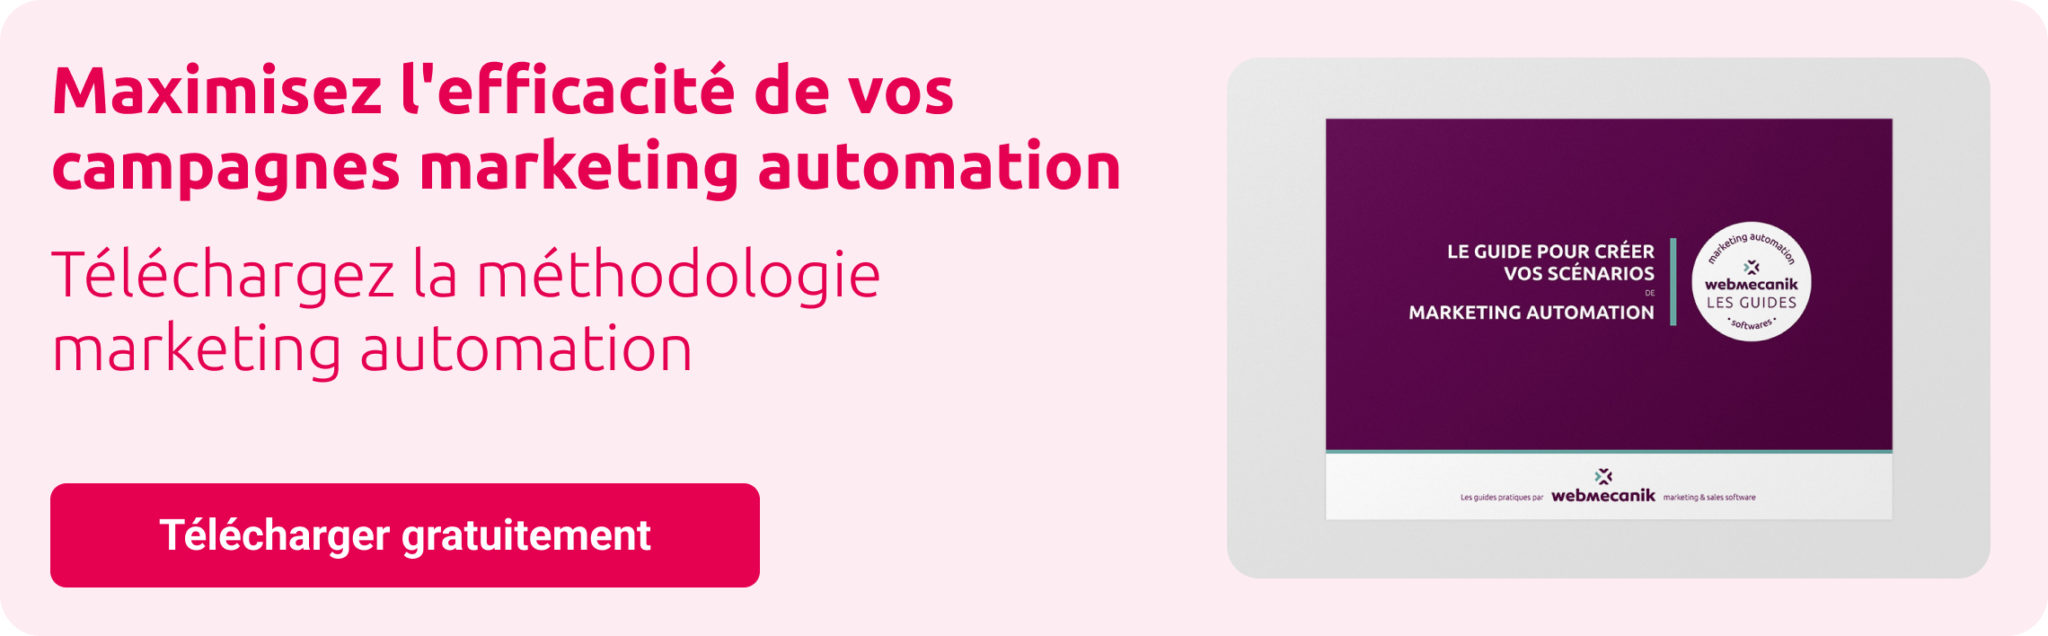 campagne-marketing-automation